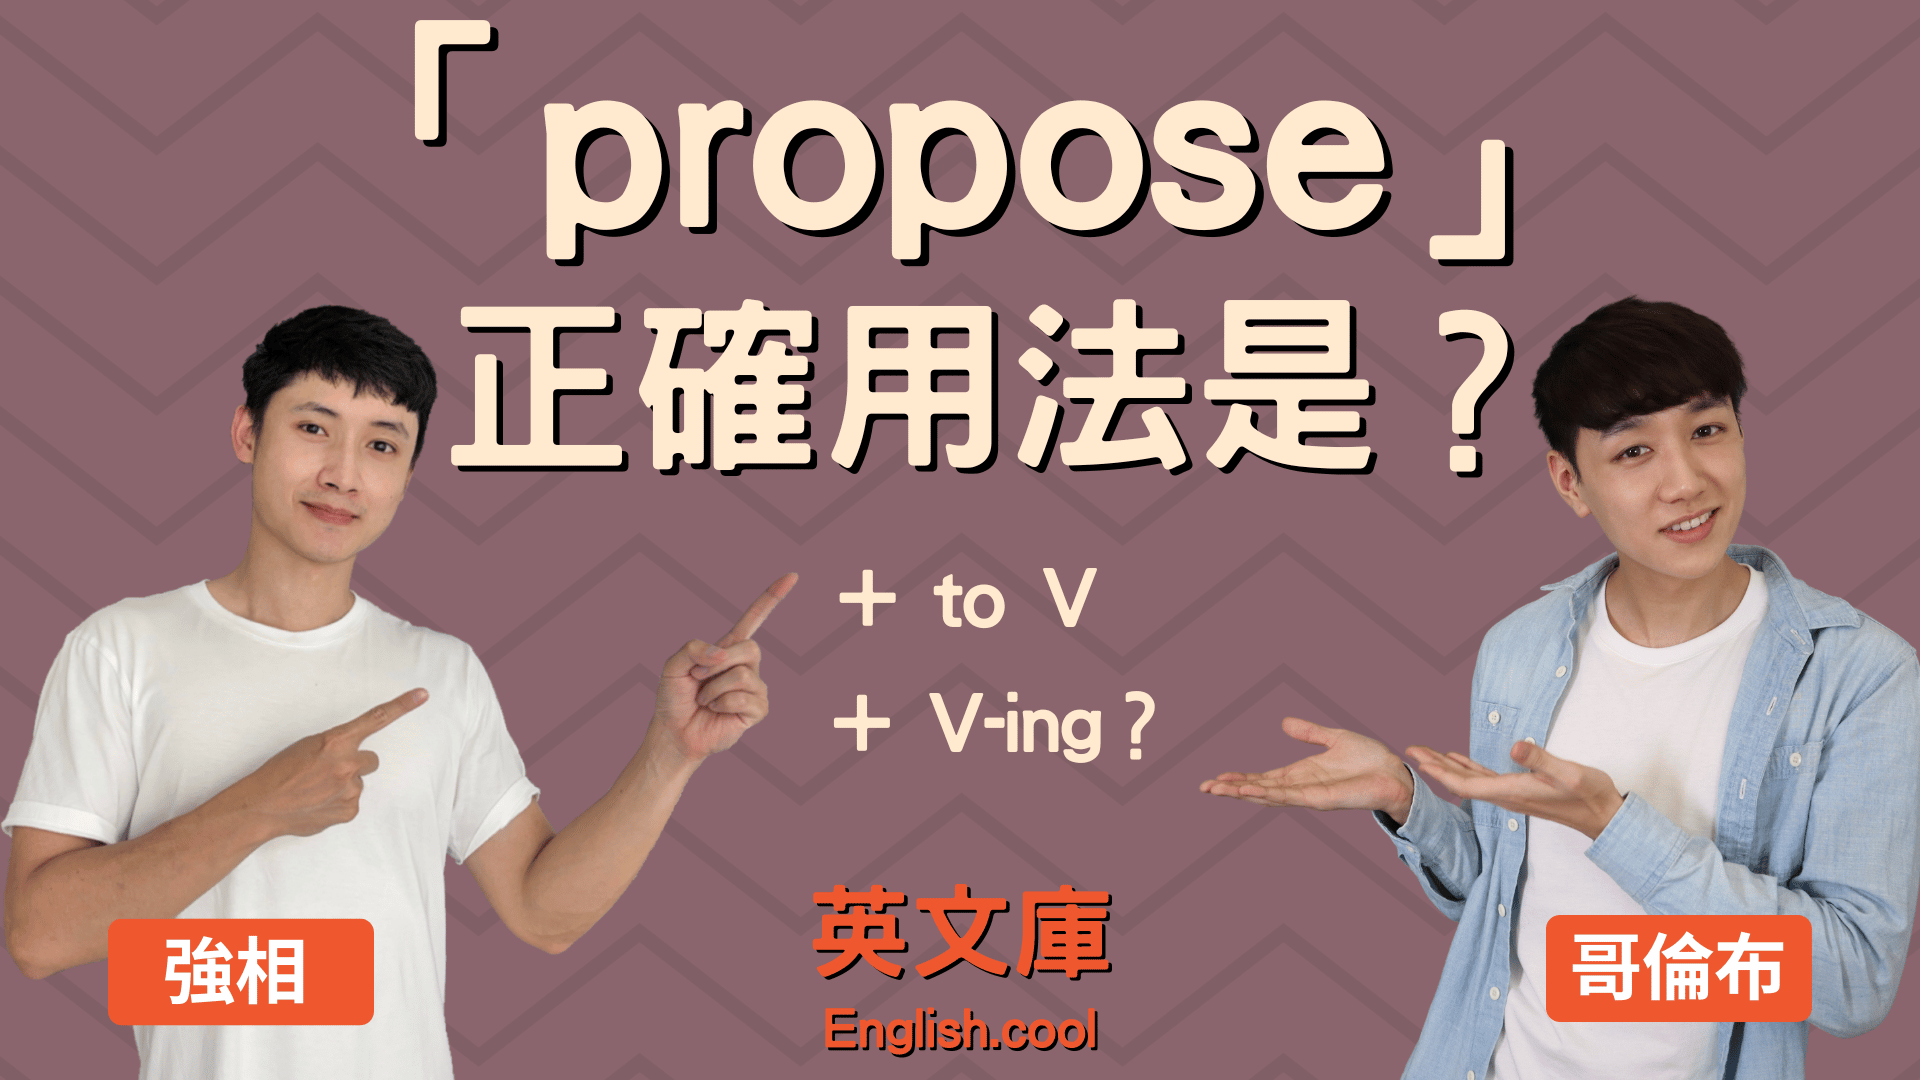 You are currently viewing 「propose」正確用法是？後面接 to V 還是 V-ing？